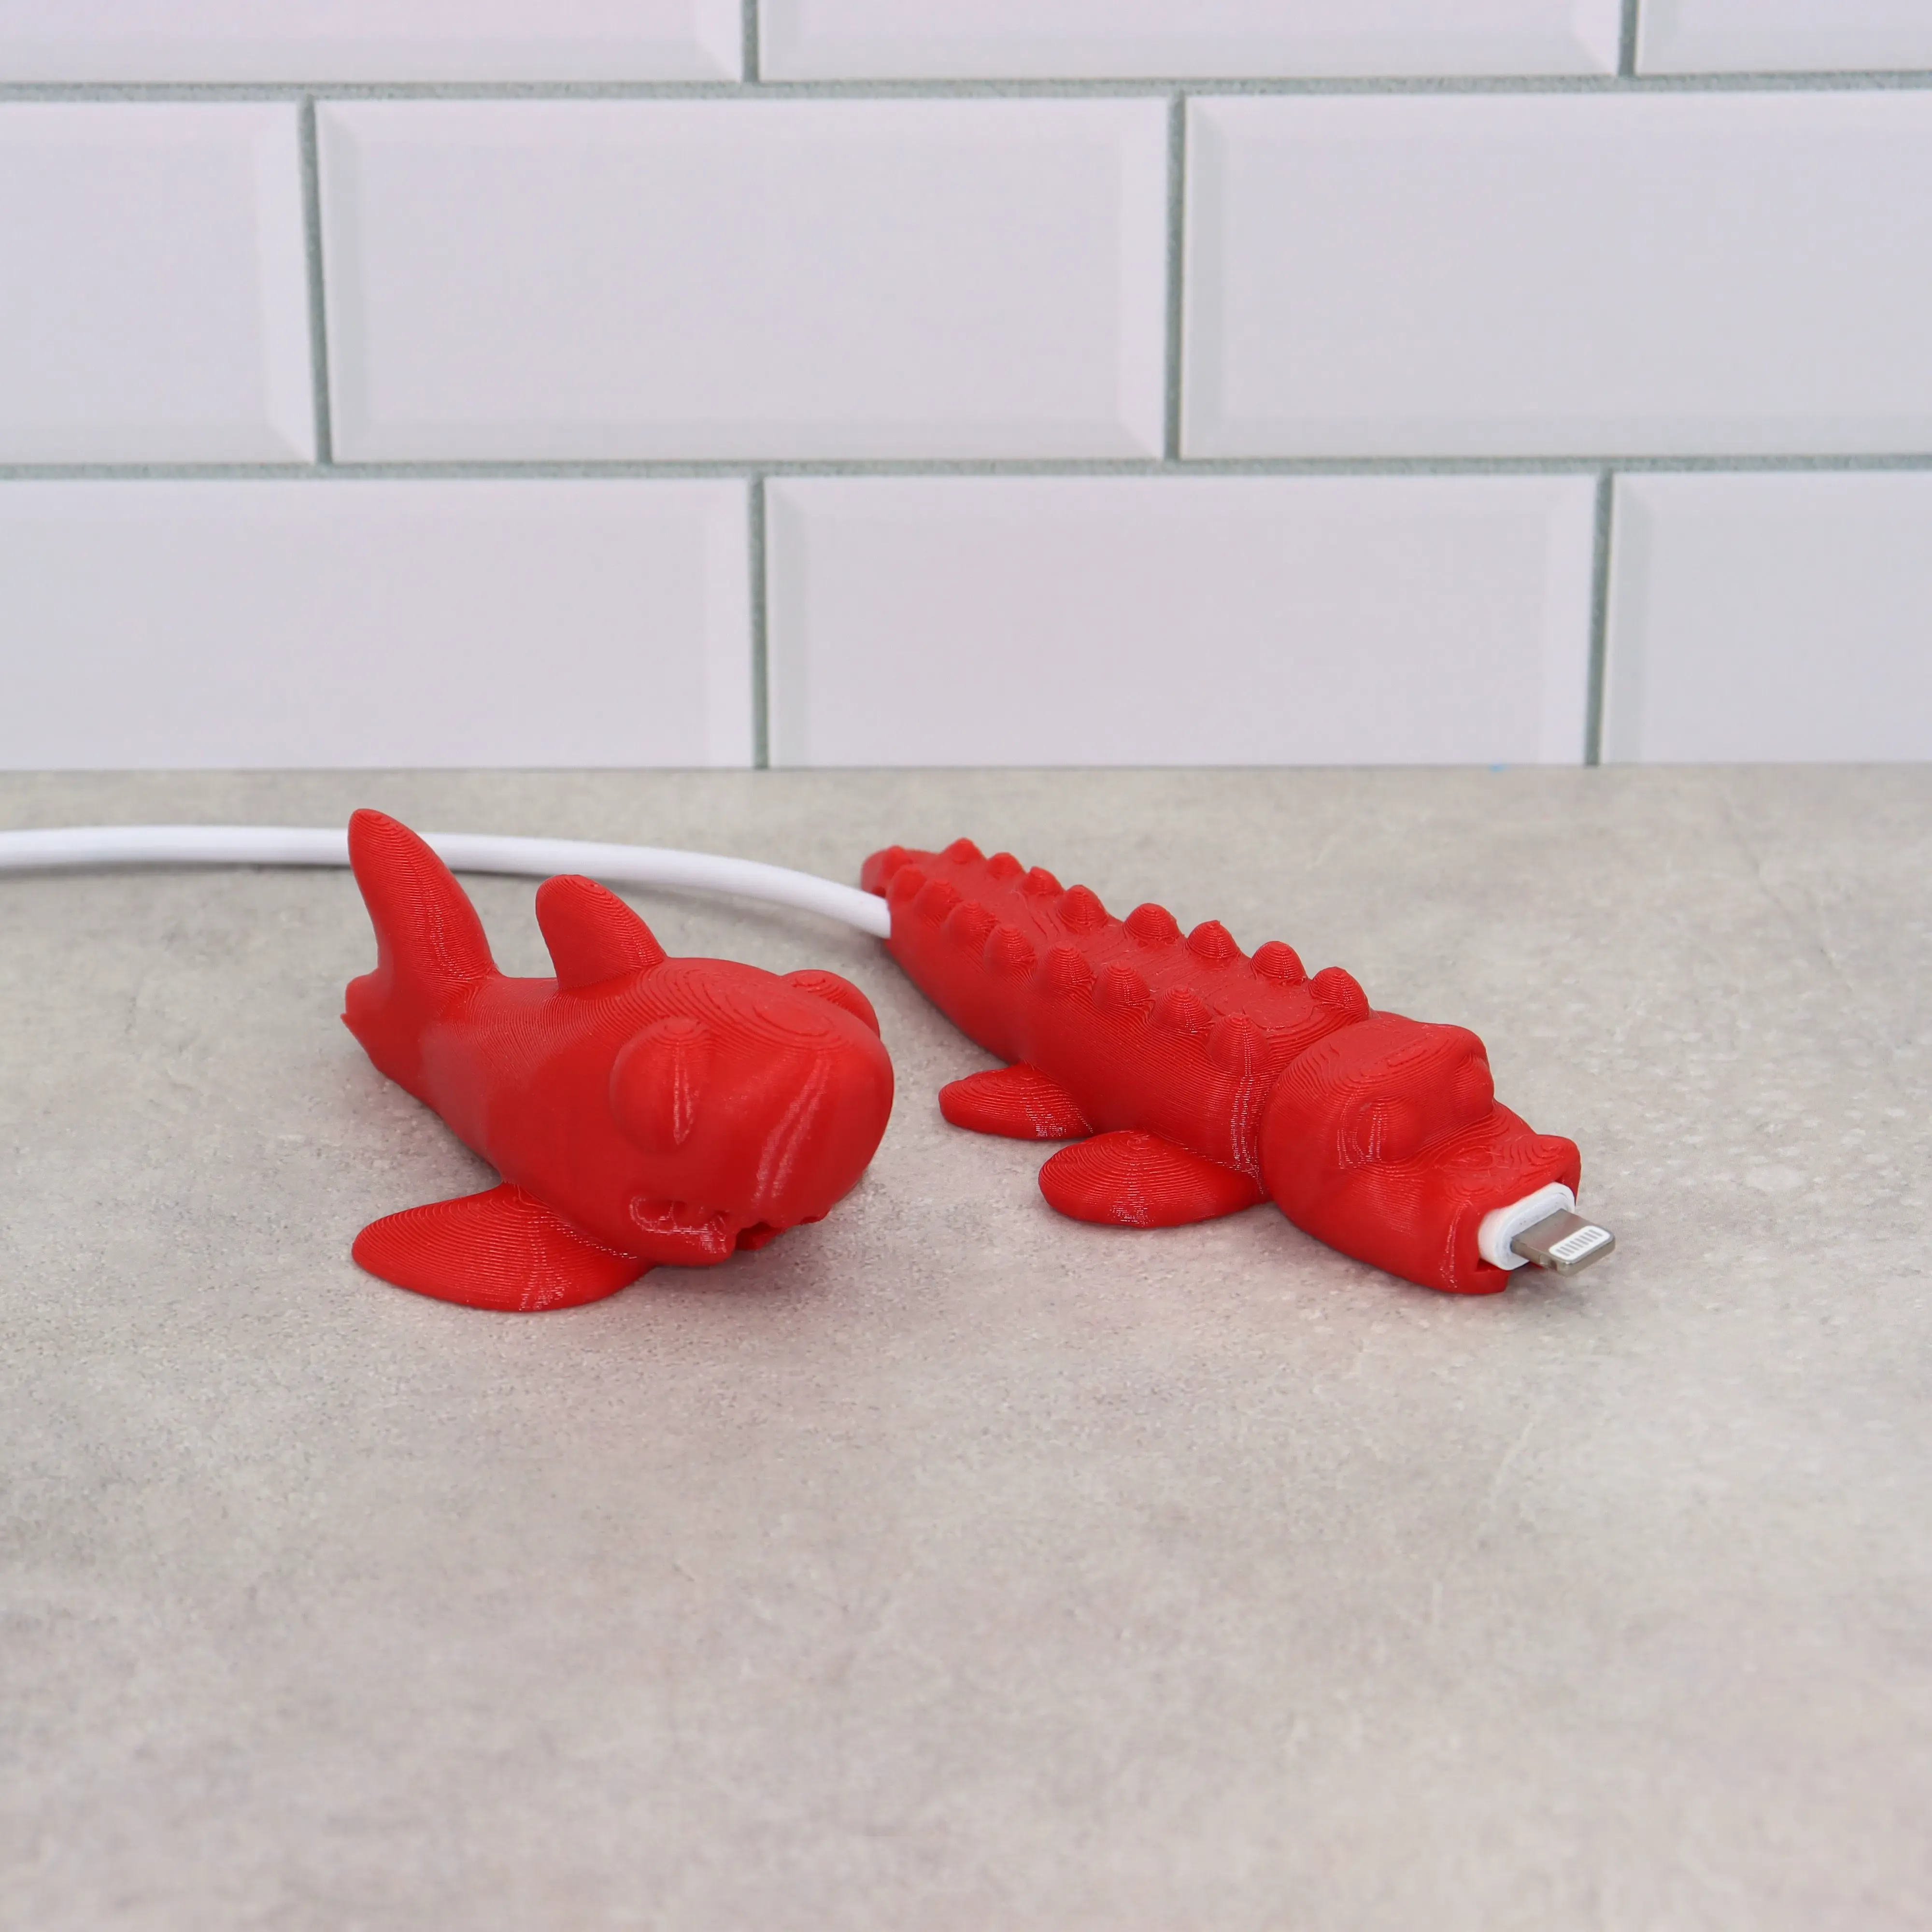 Cable biters pack 1 - shark croc